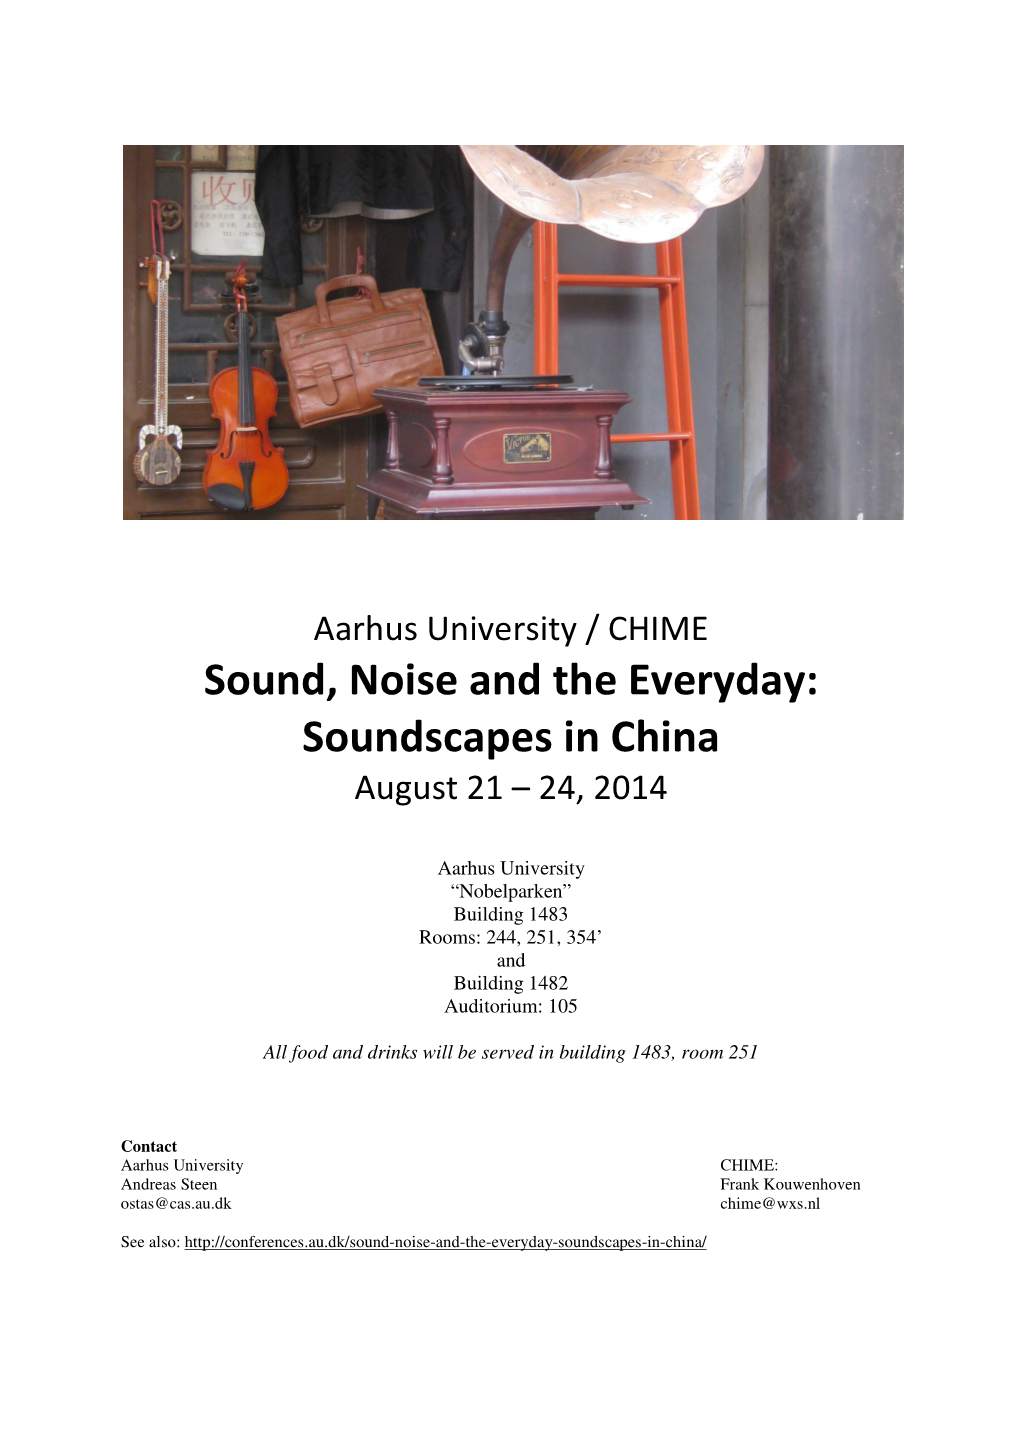 Sound, Noise and the Everyday: Soundscapes in China August 21 – 24, 2014